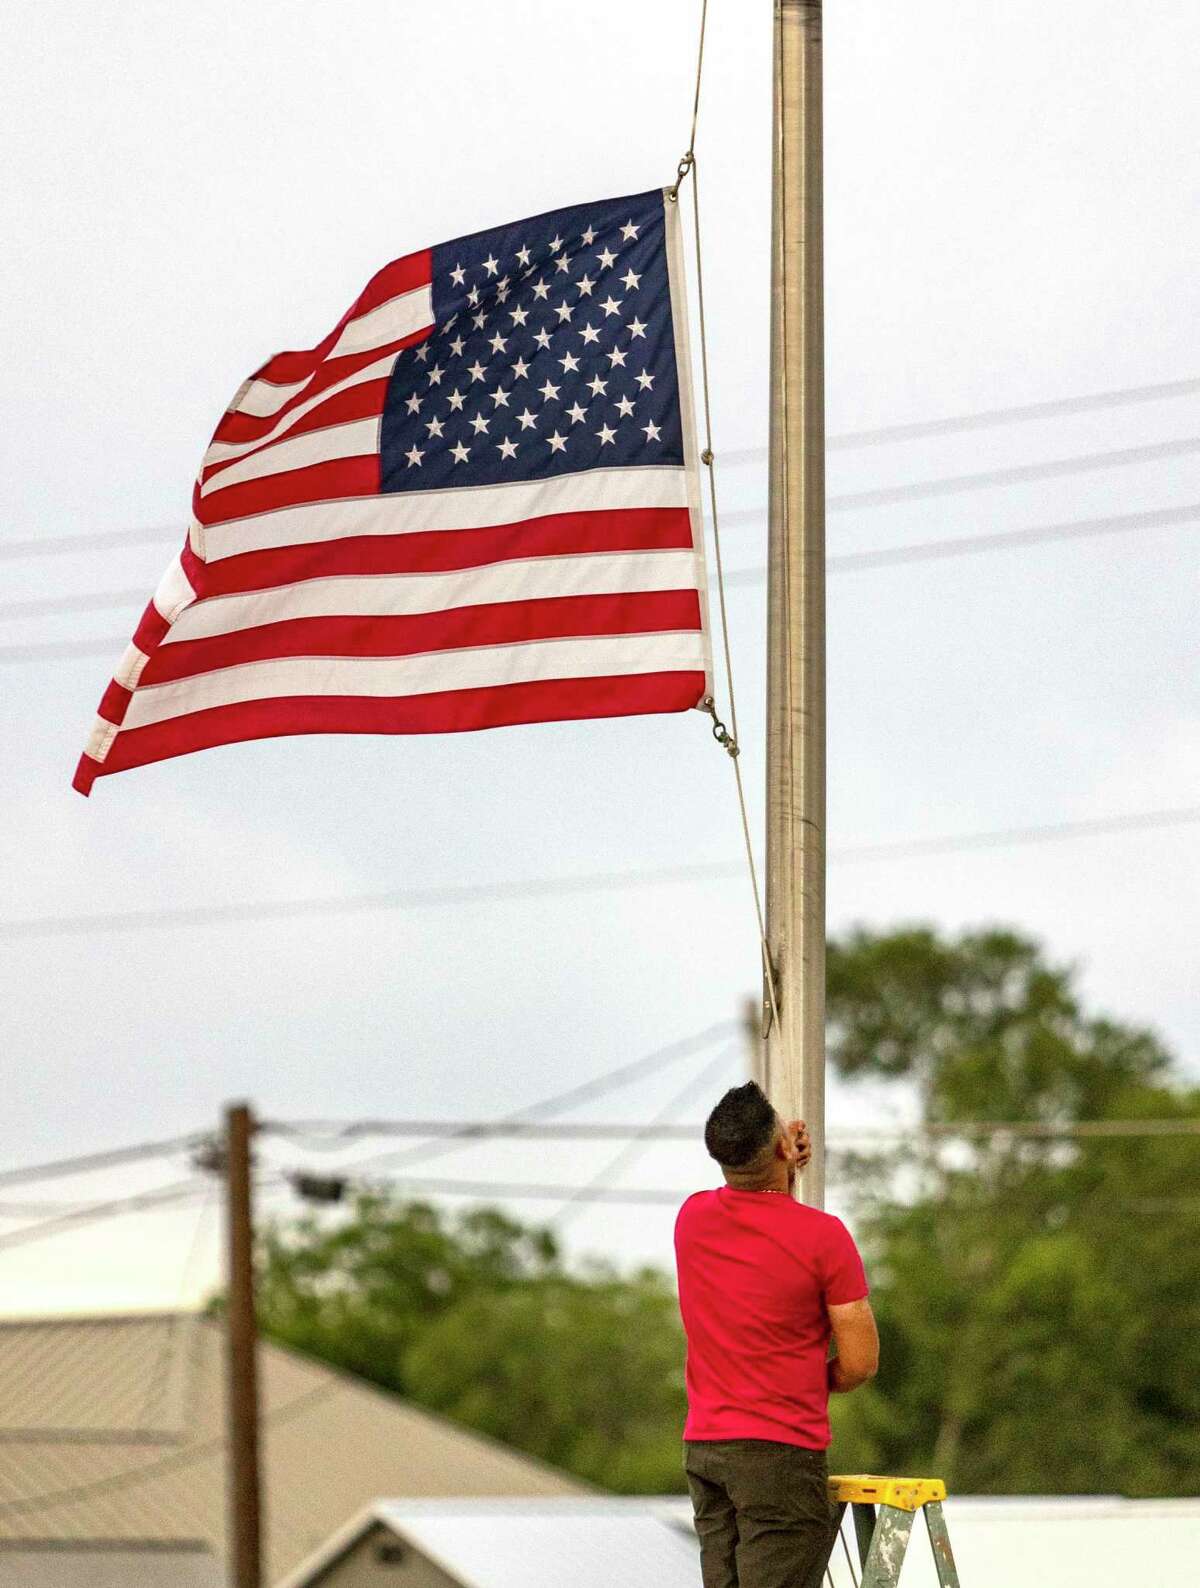 Janish Patel lowers the flag to half staff Tuesday, May 24, 2022 at his Uvalde hotel hours after a gunman entered Robb Elementary School in Uvalde and killed at least 18 children and three adults.